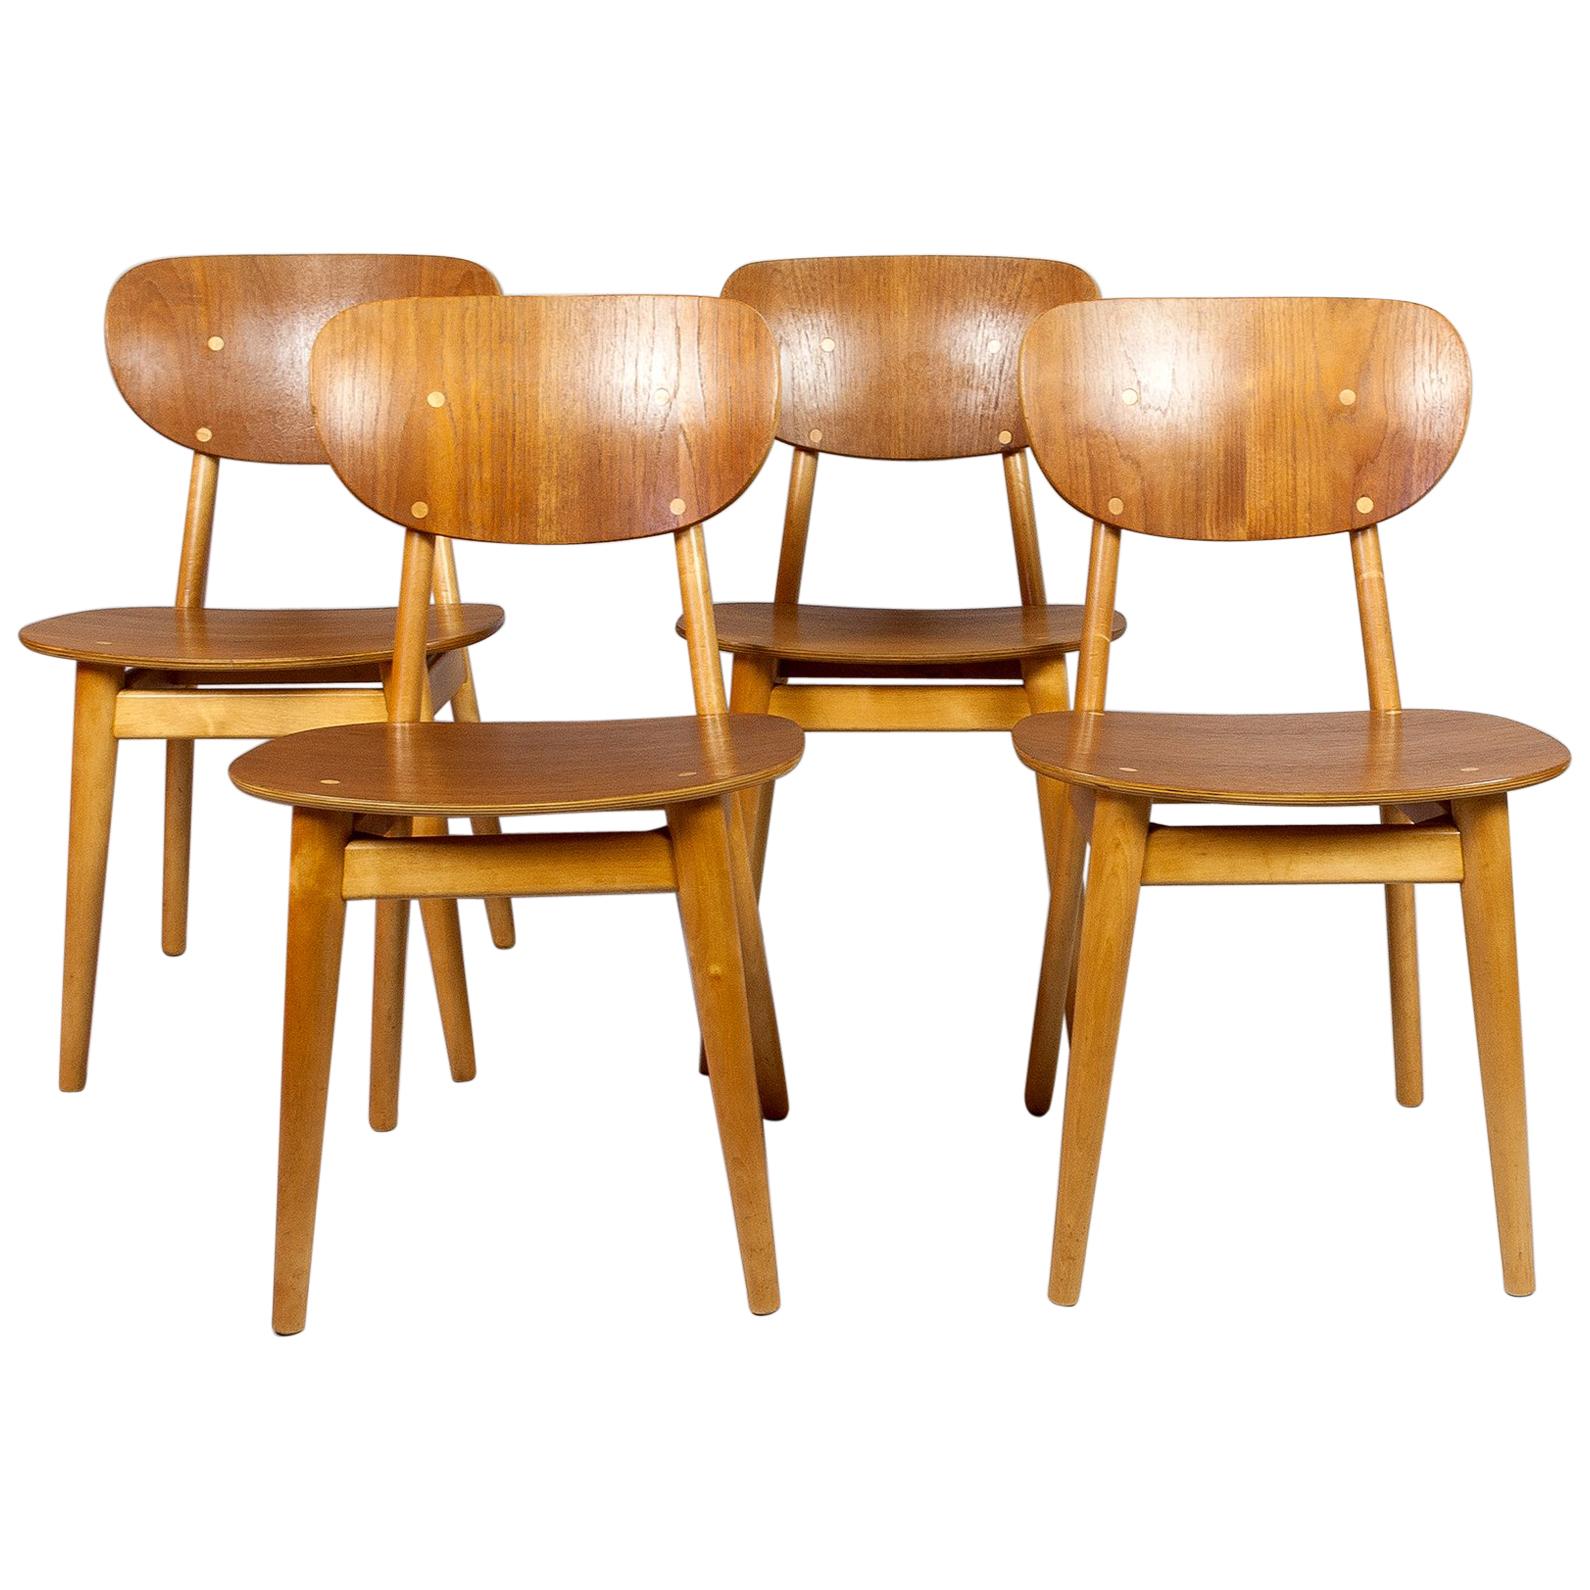 SB11 Cees Braakman Dining Chairs for Pastoe, Maple and Teak, Denmark, 1950s